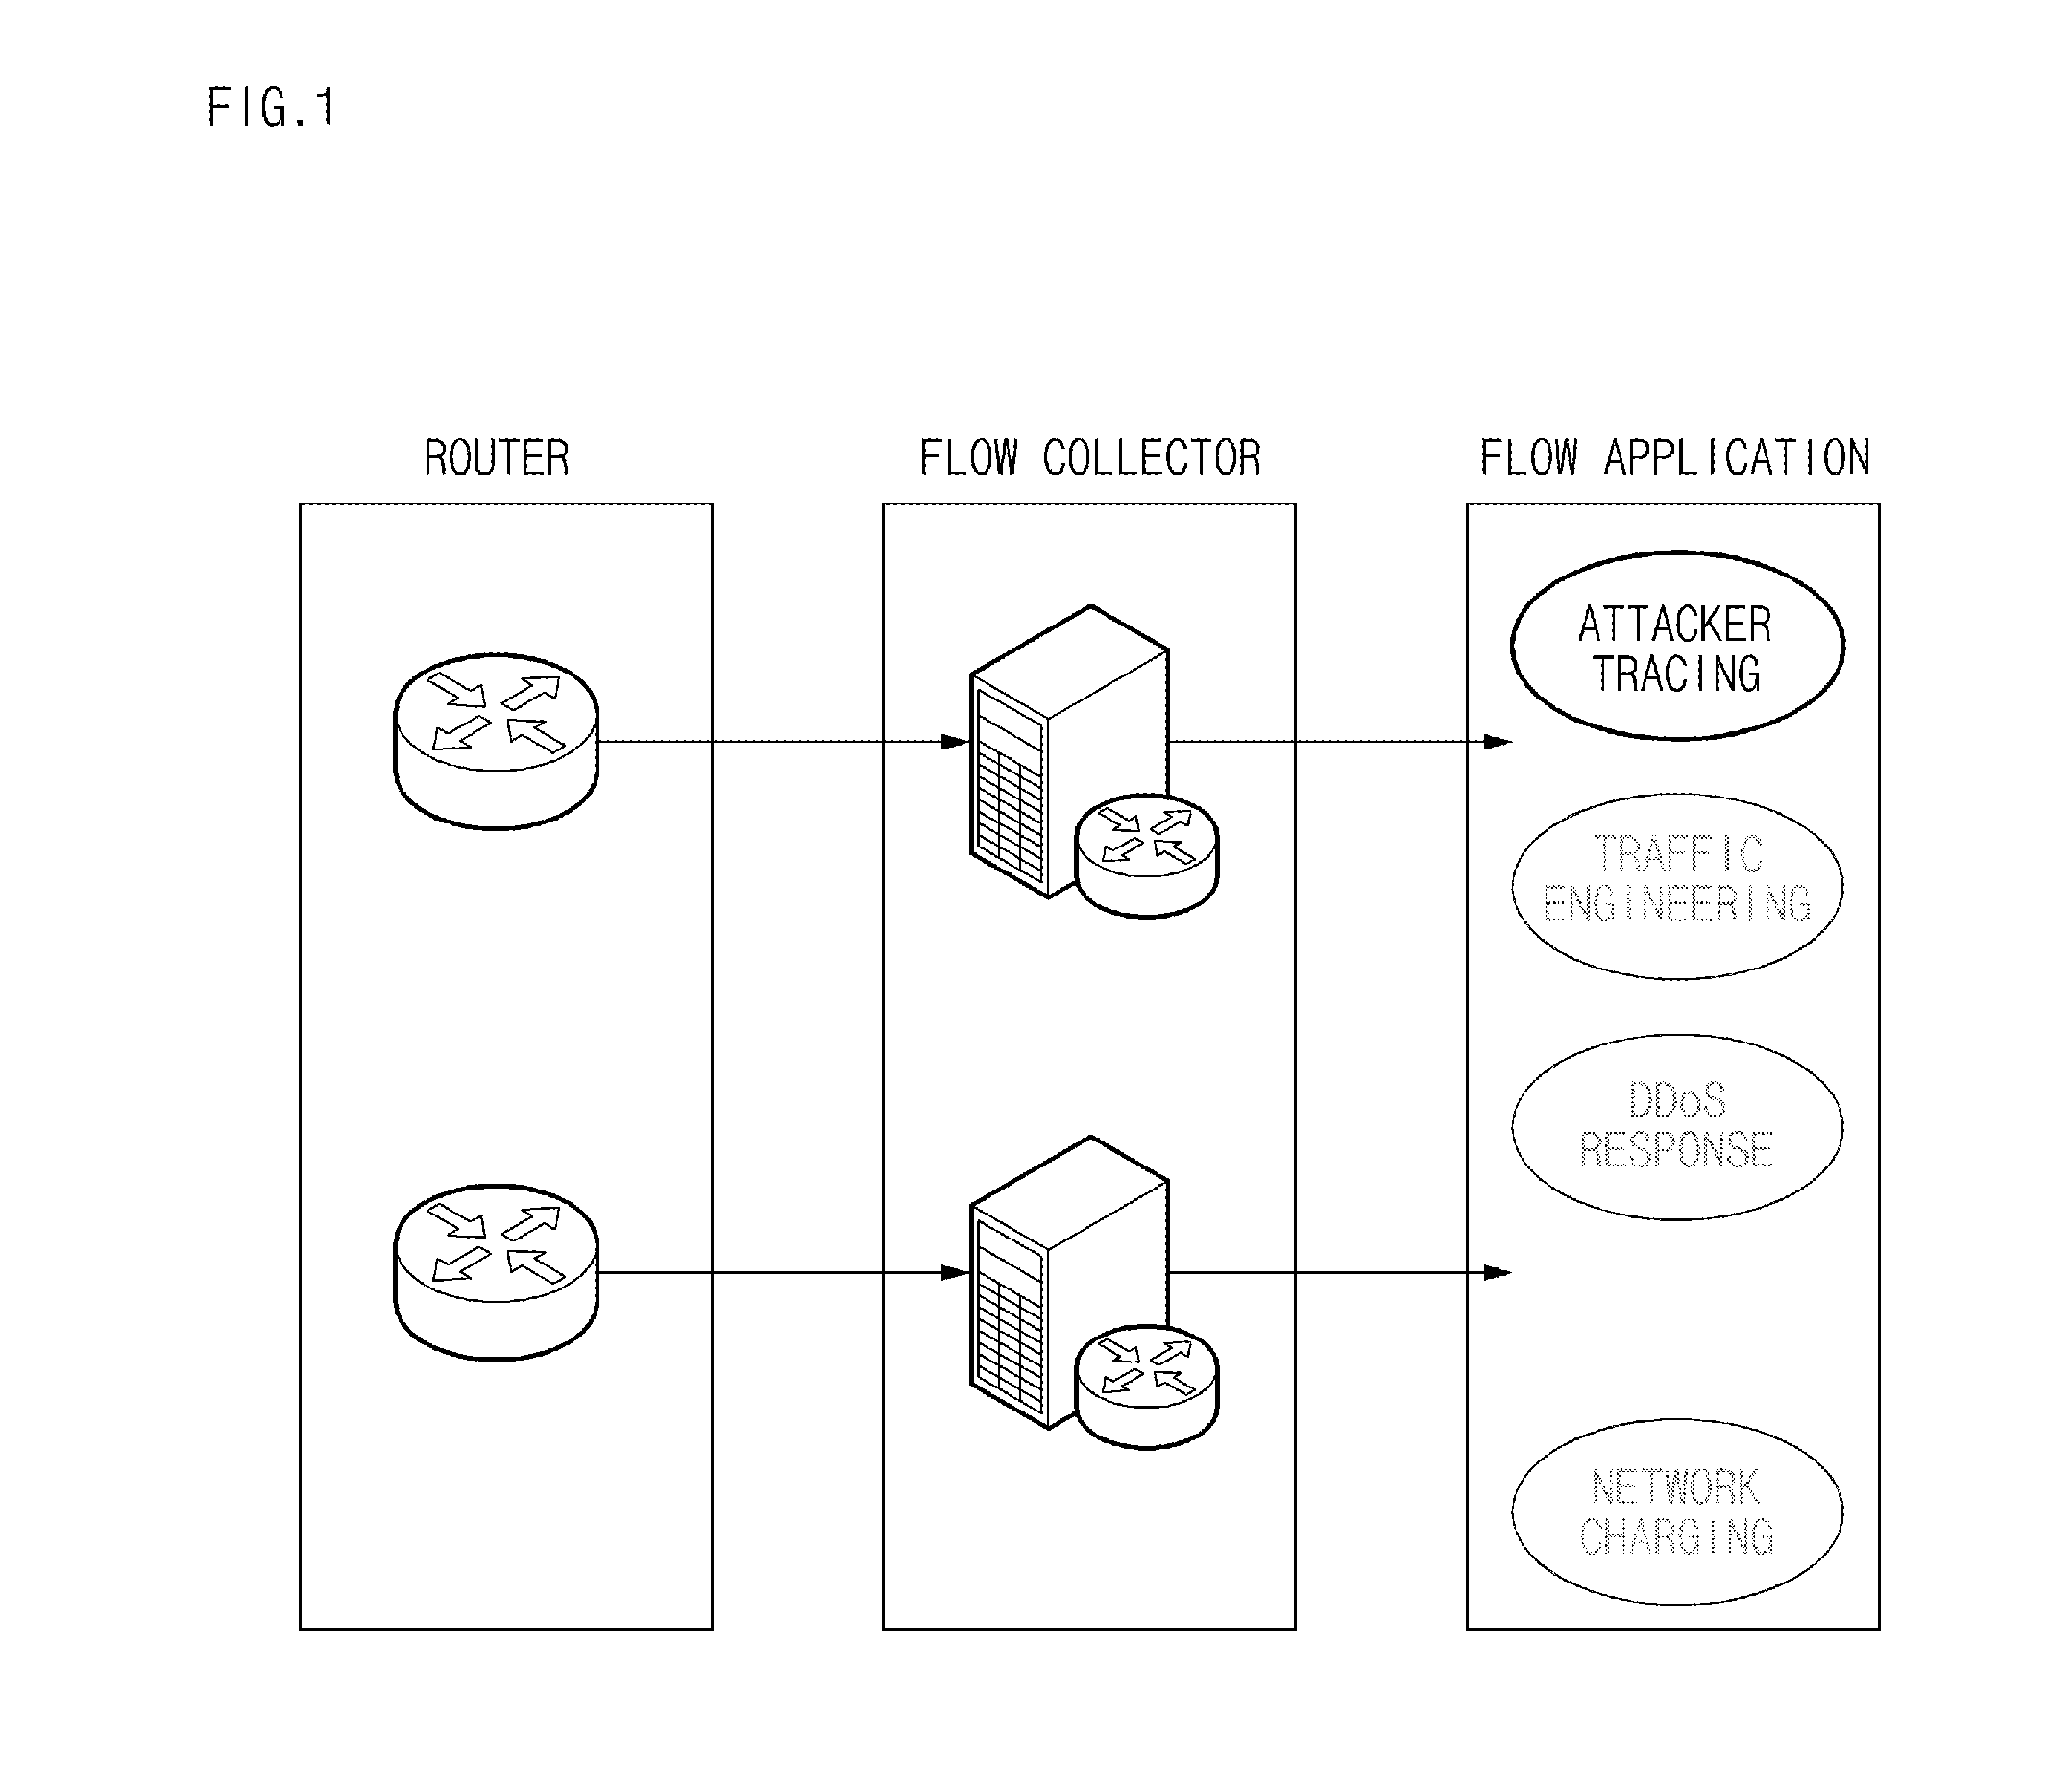 Method and system for network connection chain traceback using network flow data